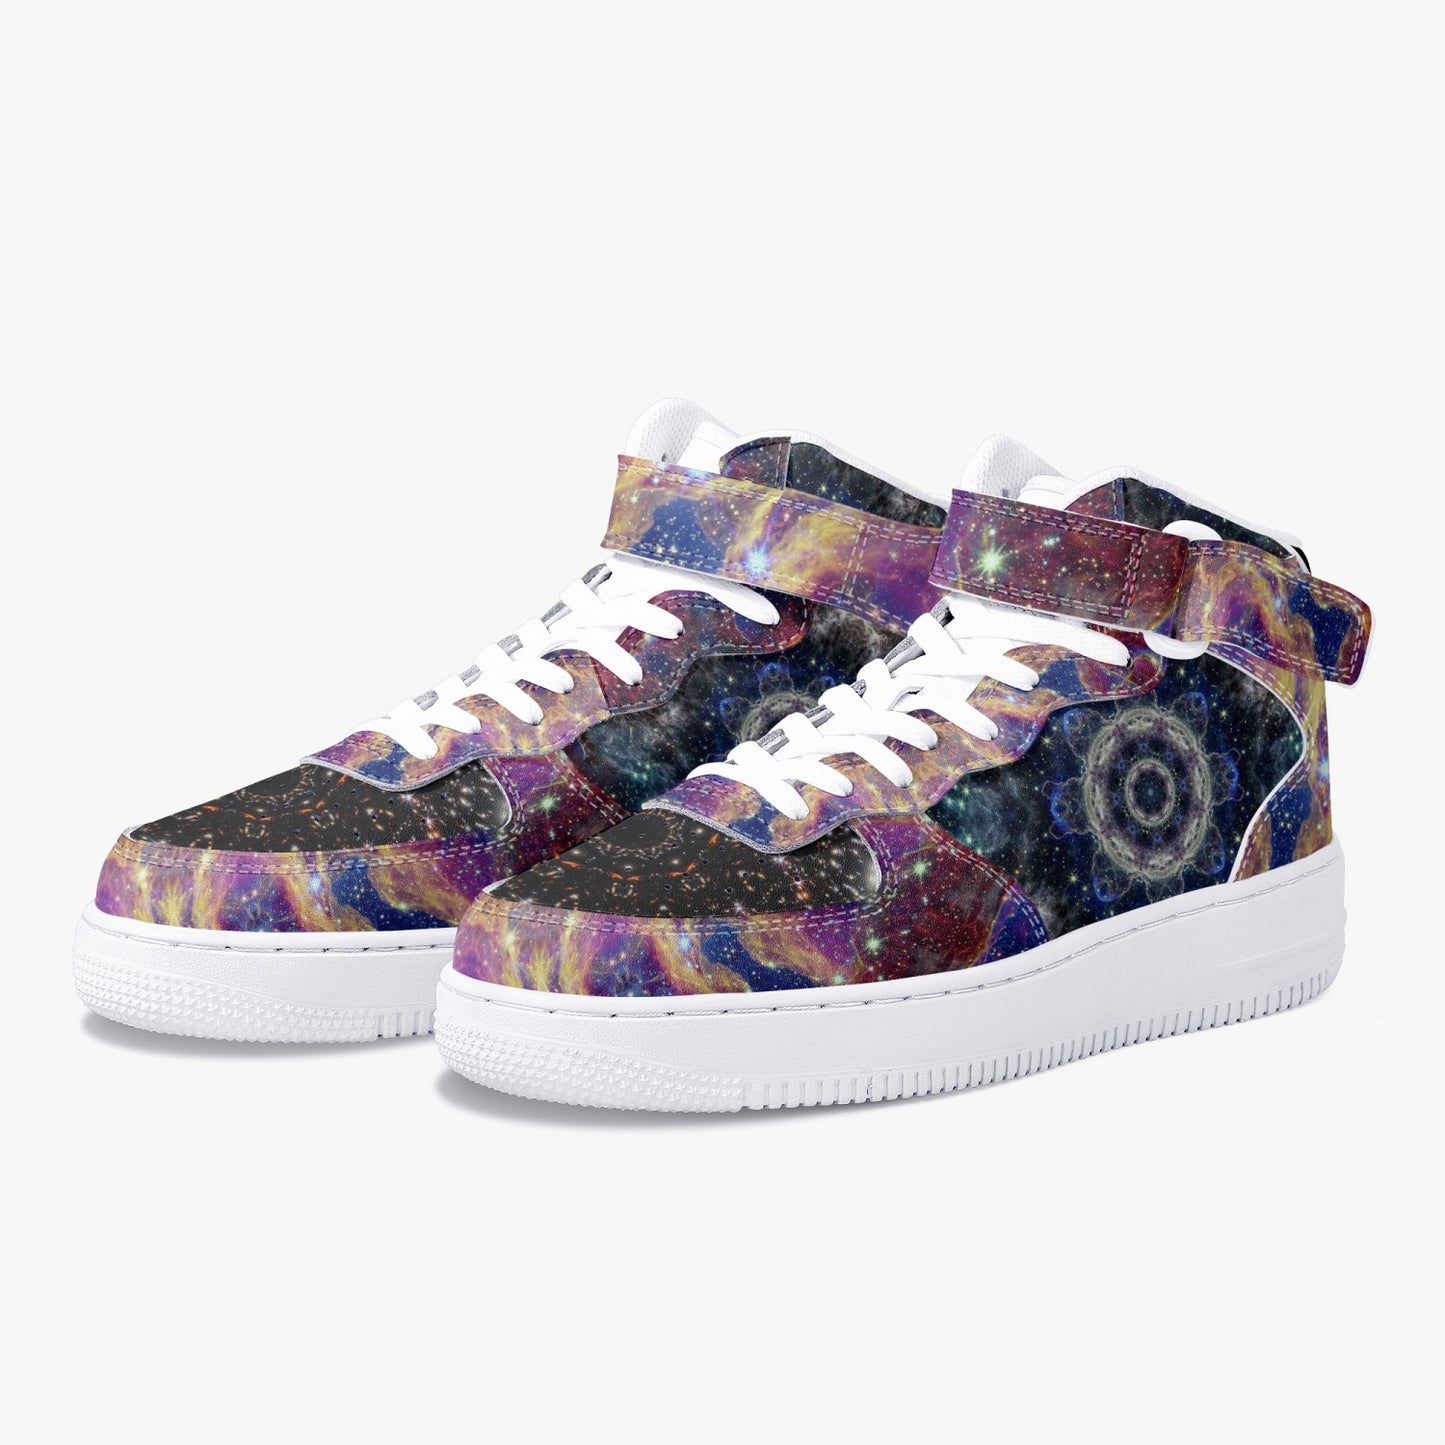 Space Cadet High-Top Sneakers